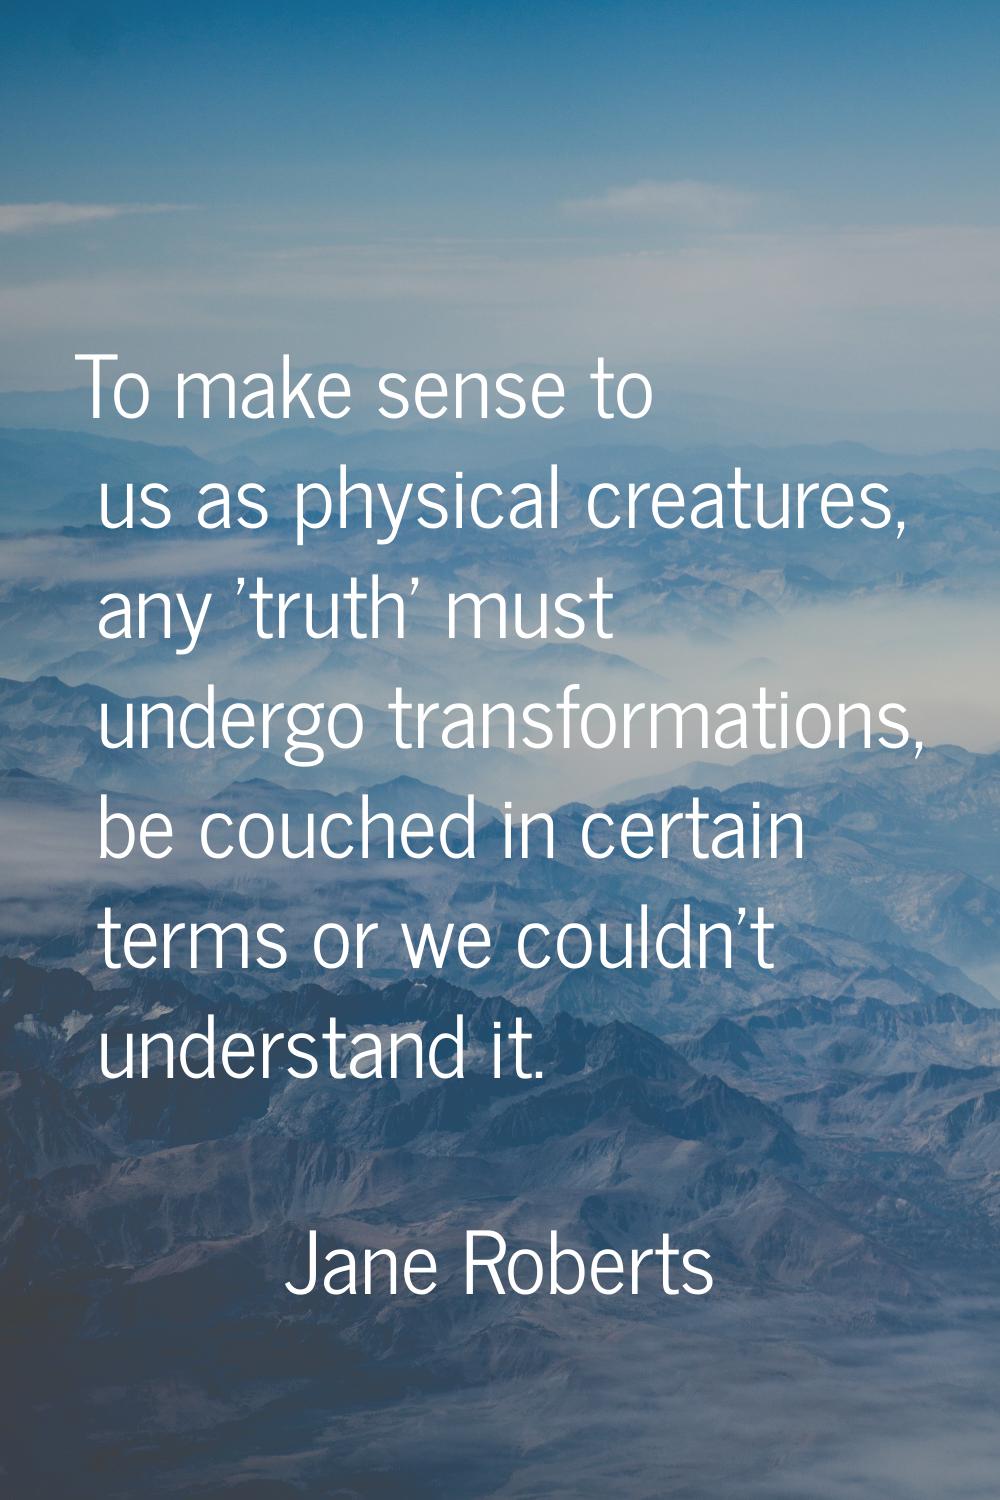 To make sense to us as physical creatures, any 'truth' must undergo transformations, be couched in 